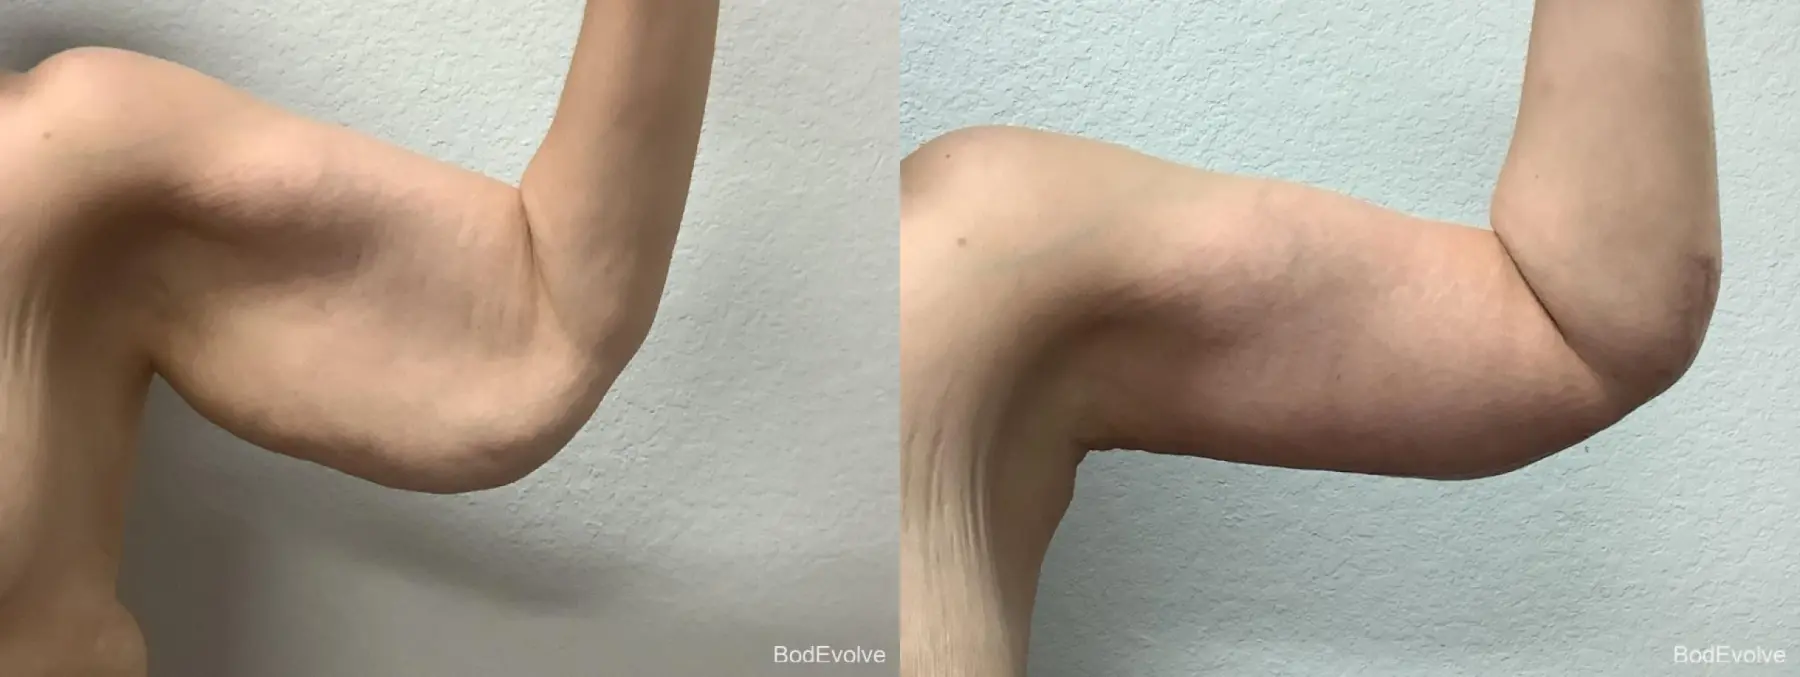 Arm Lift: Patient 1 - Before and After 2